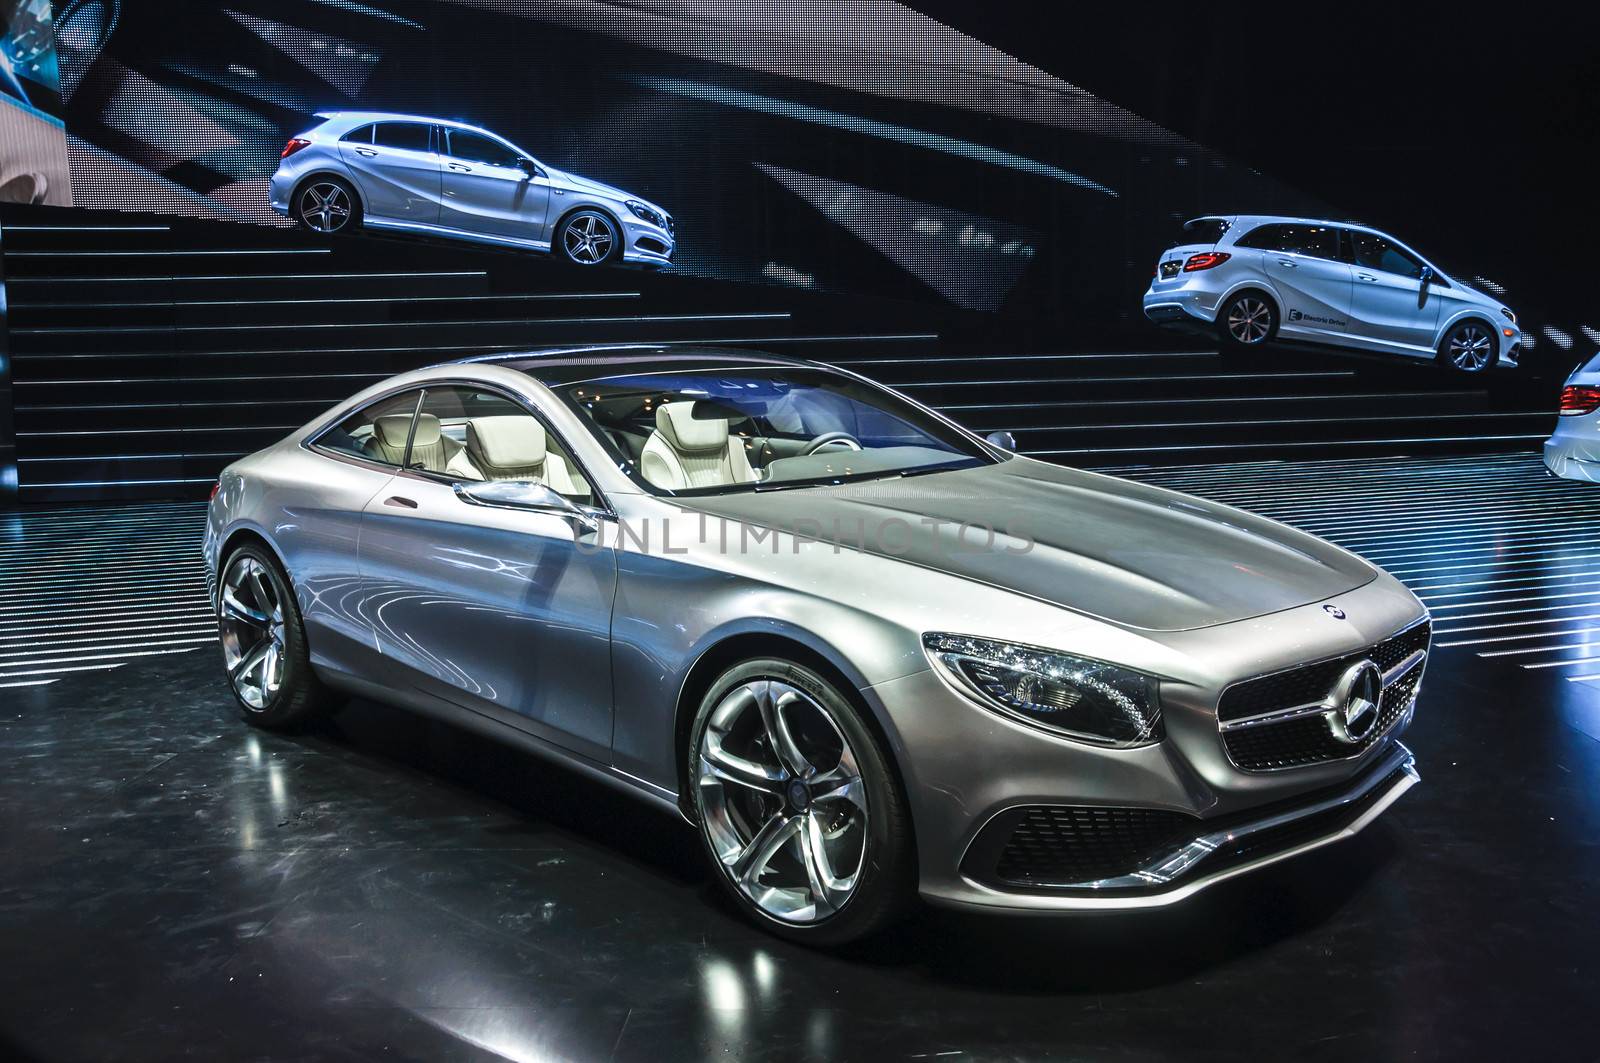 FRANKFURT - SEPT 21: Mercedes-Benz Concept S-Class Coupe presented as world premiere at the 65th IAA (Internationale Automobil Ausstellung) on September 21, 2013 in Frankfurt, Germany